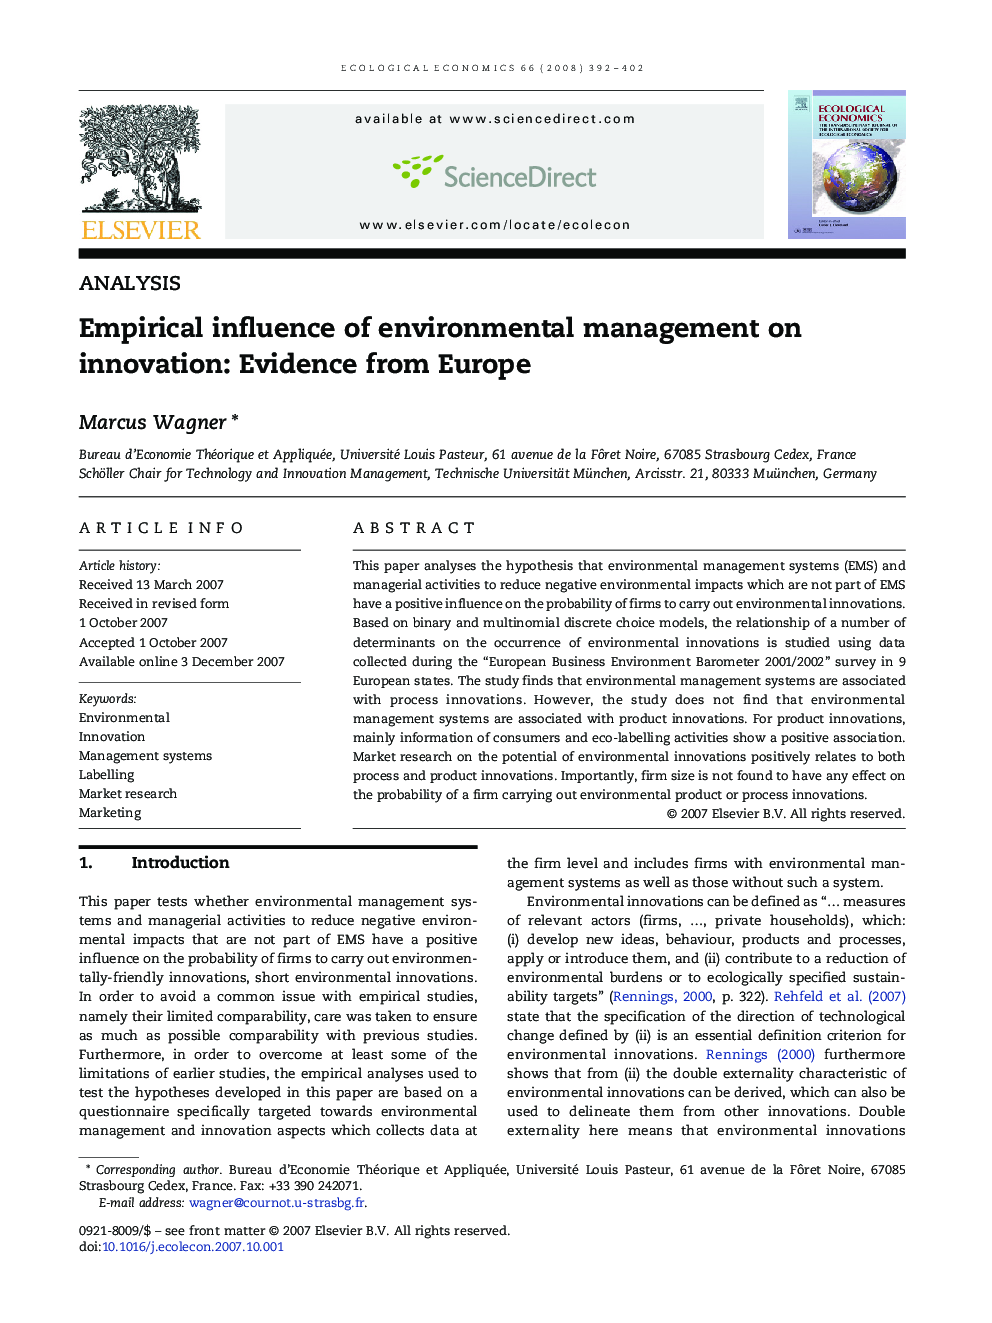 Empirical influence of environmental management on innovation: Evidence from Europe